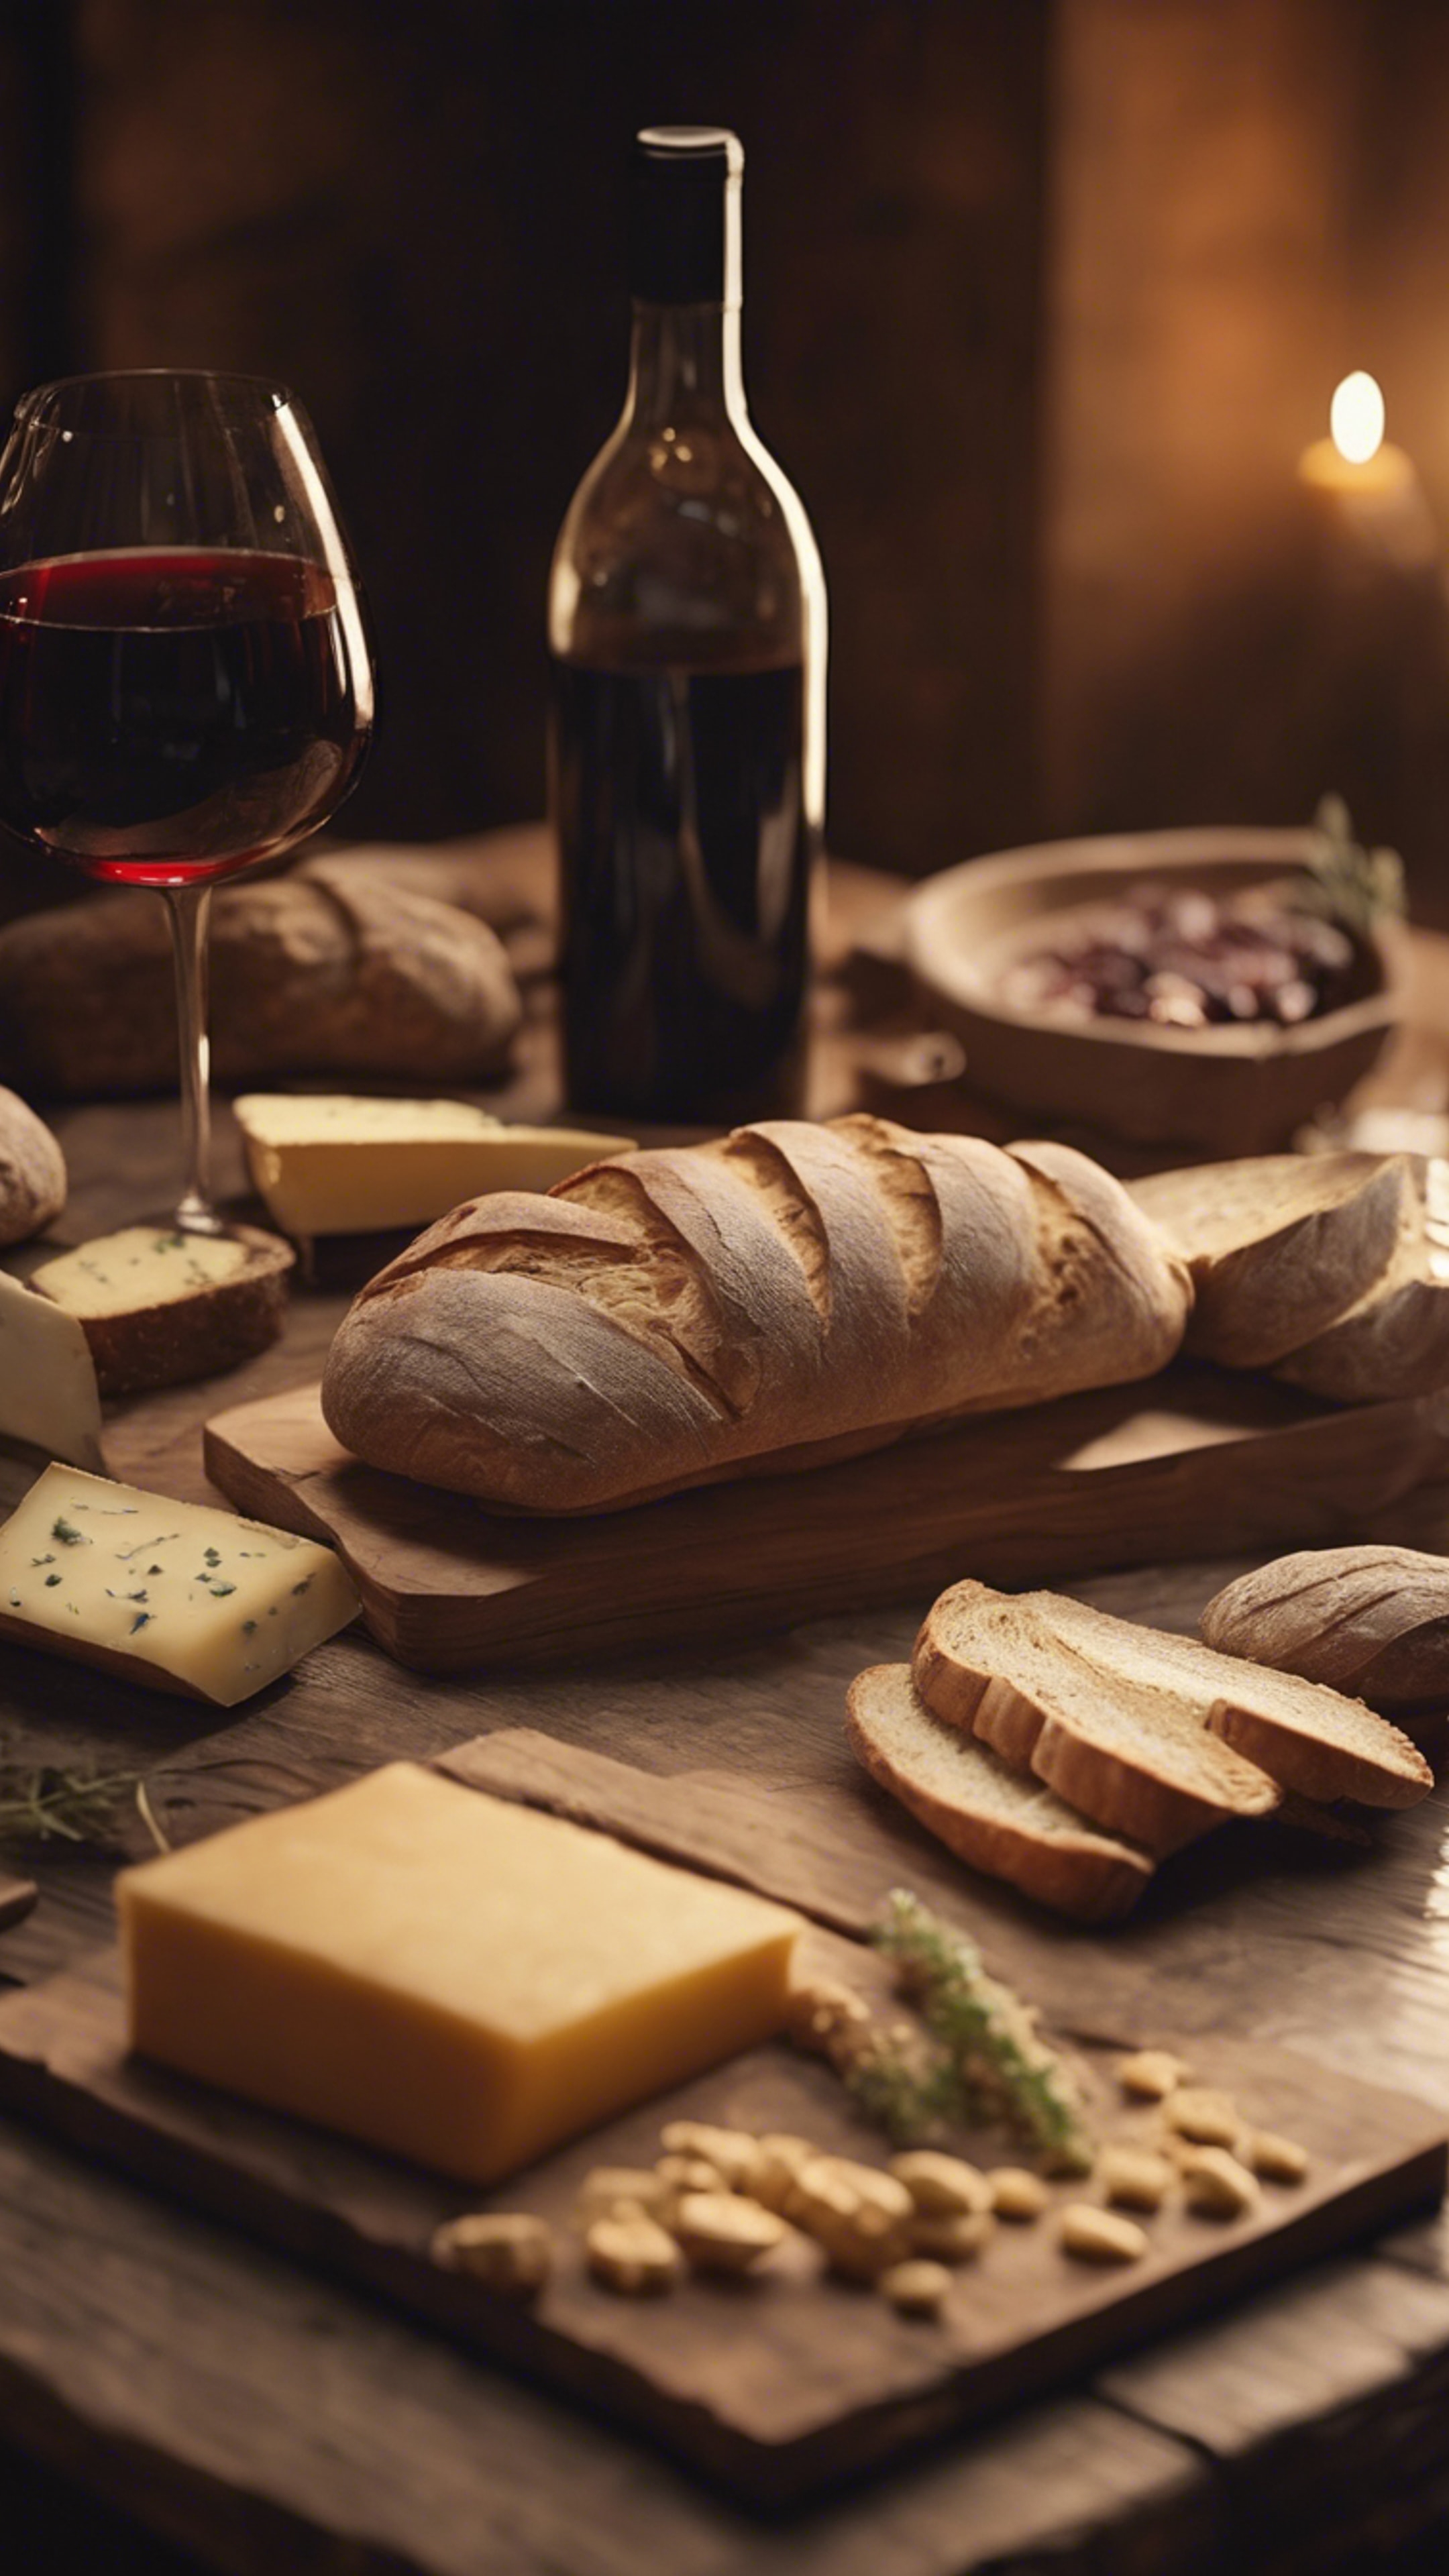 Detailed close-up of a rustic French country-style wooden table set with fresh bread, wine, and cheese under warm interior lighting. 墙纸[6a74bb7d88b74d998281]